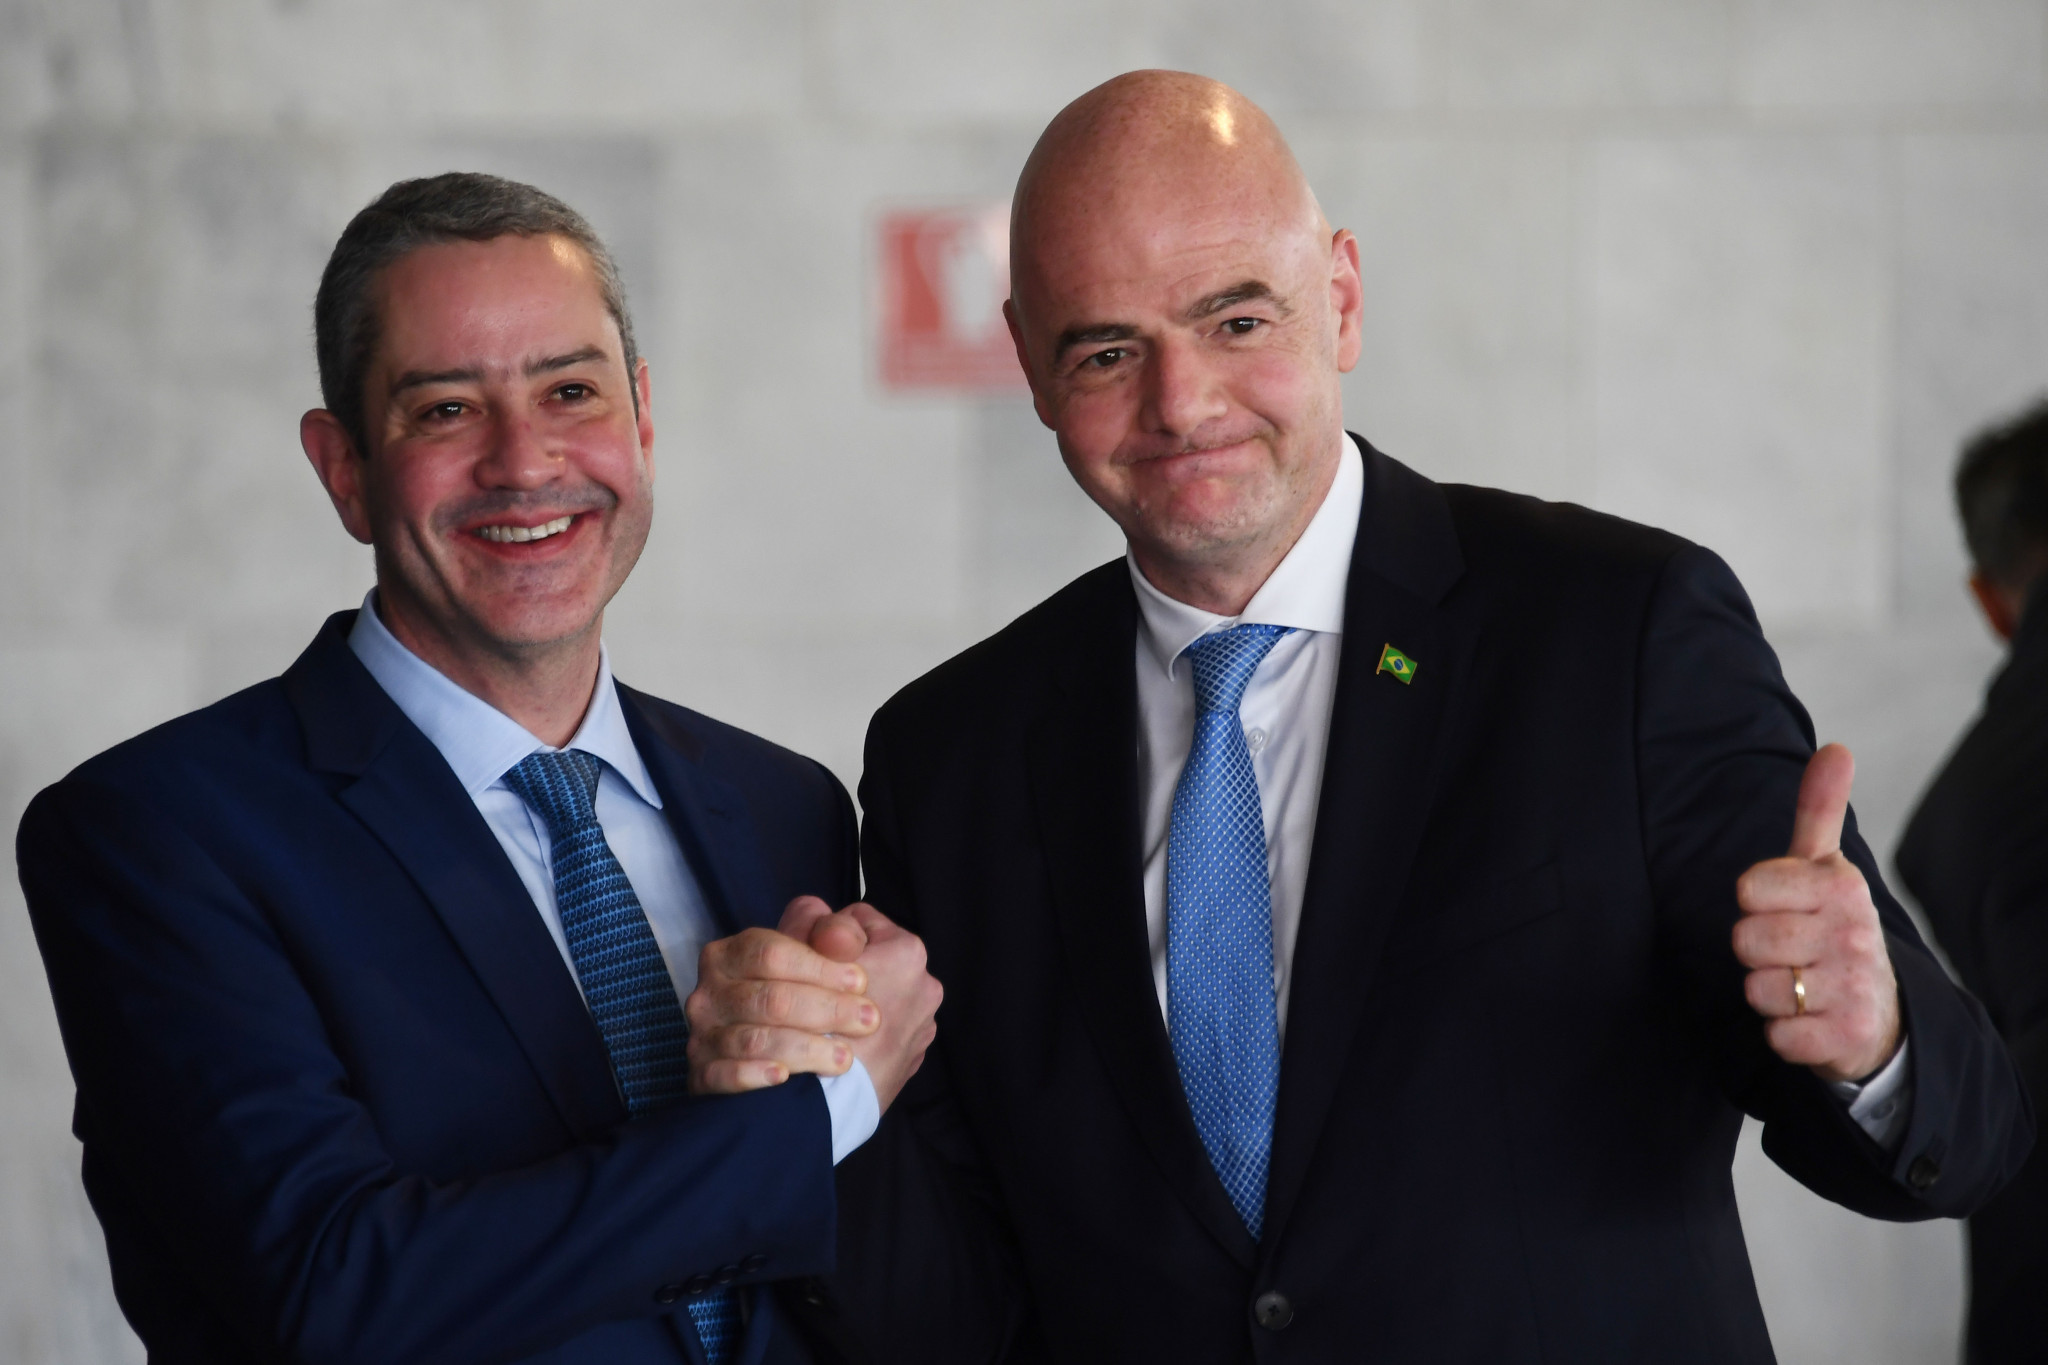 FIFA President Gianni Infantino, right, was present at the inauguration of Rogério Caboclo, left, as CBF head ©Getty Images